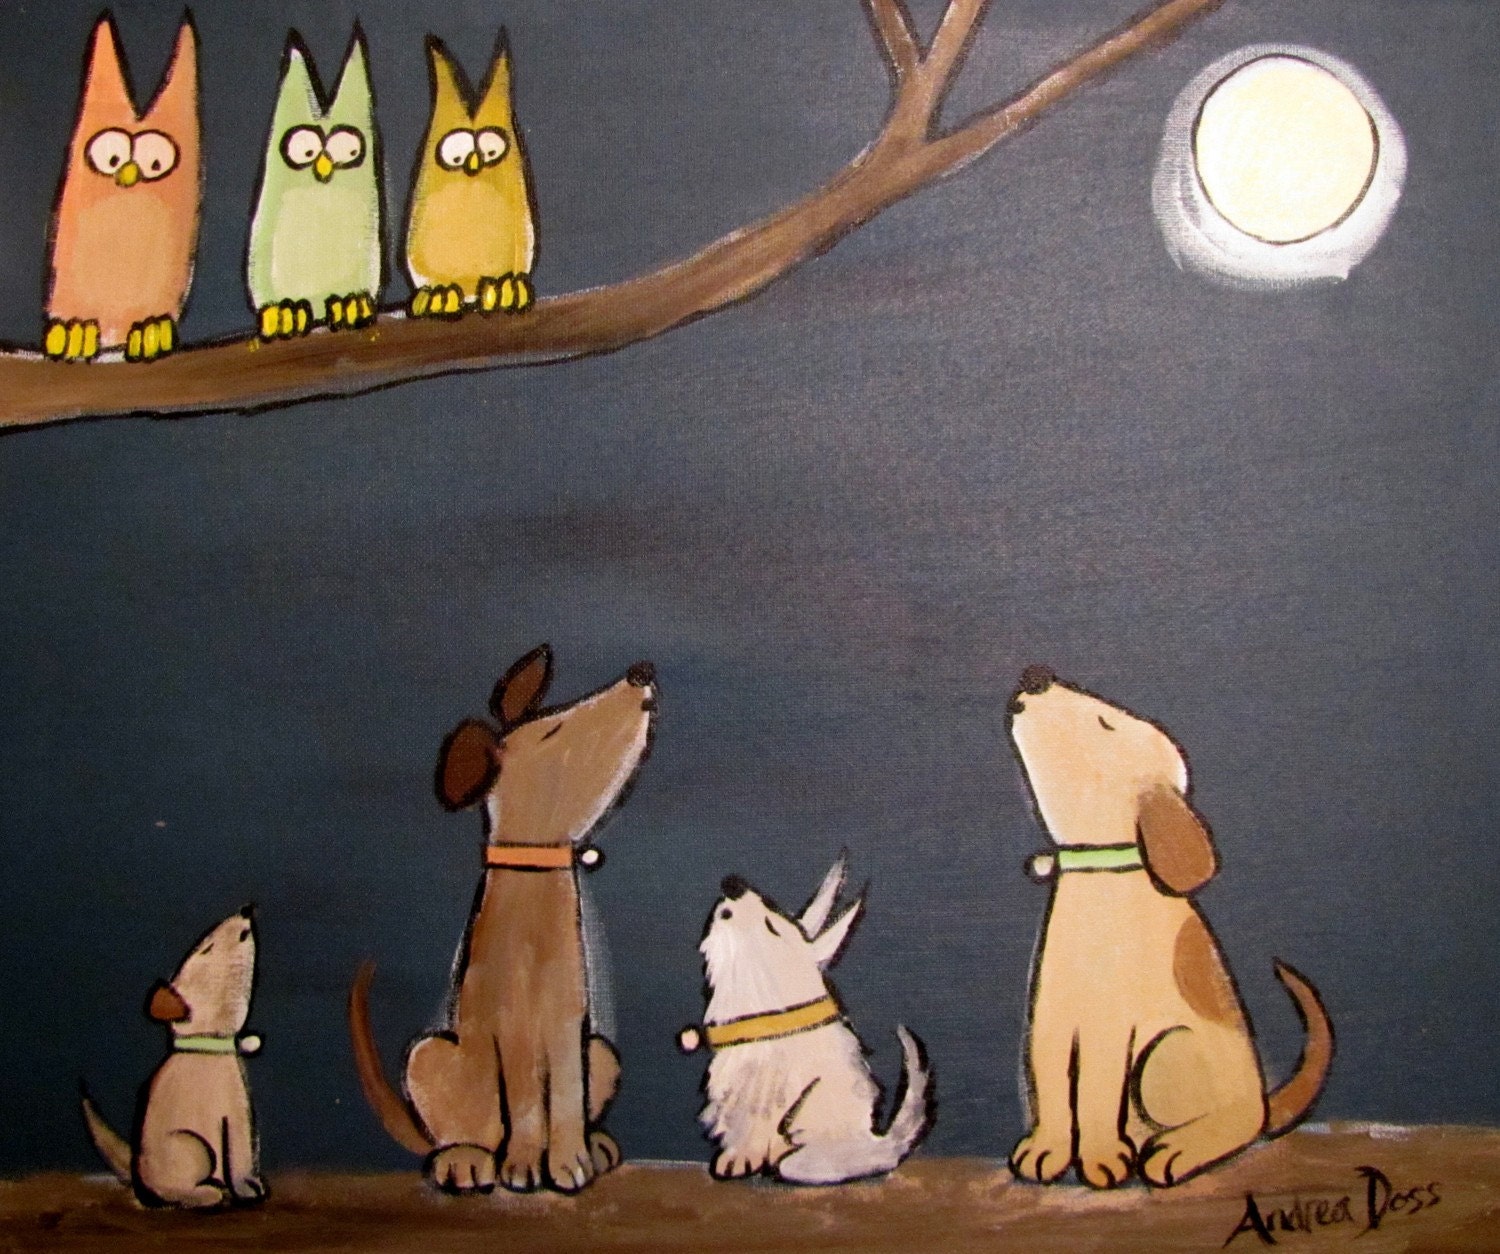 10 PERCENT OFF SALE Original 20 x 16 Howling at the Moon by Andrea Doss